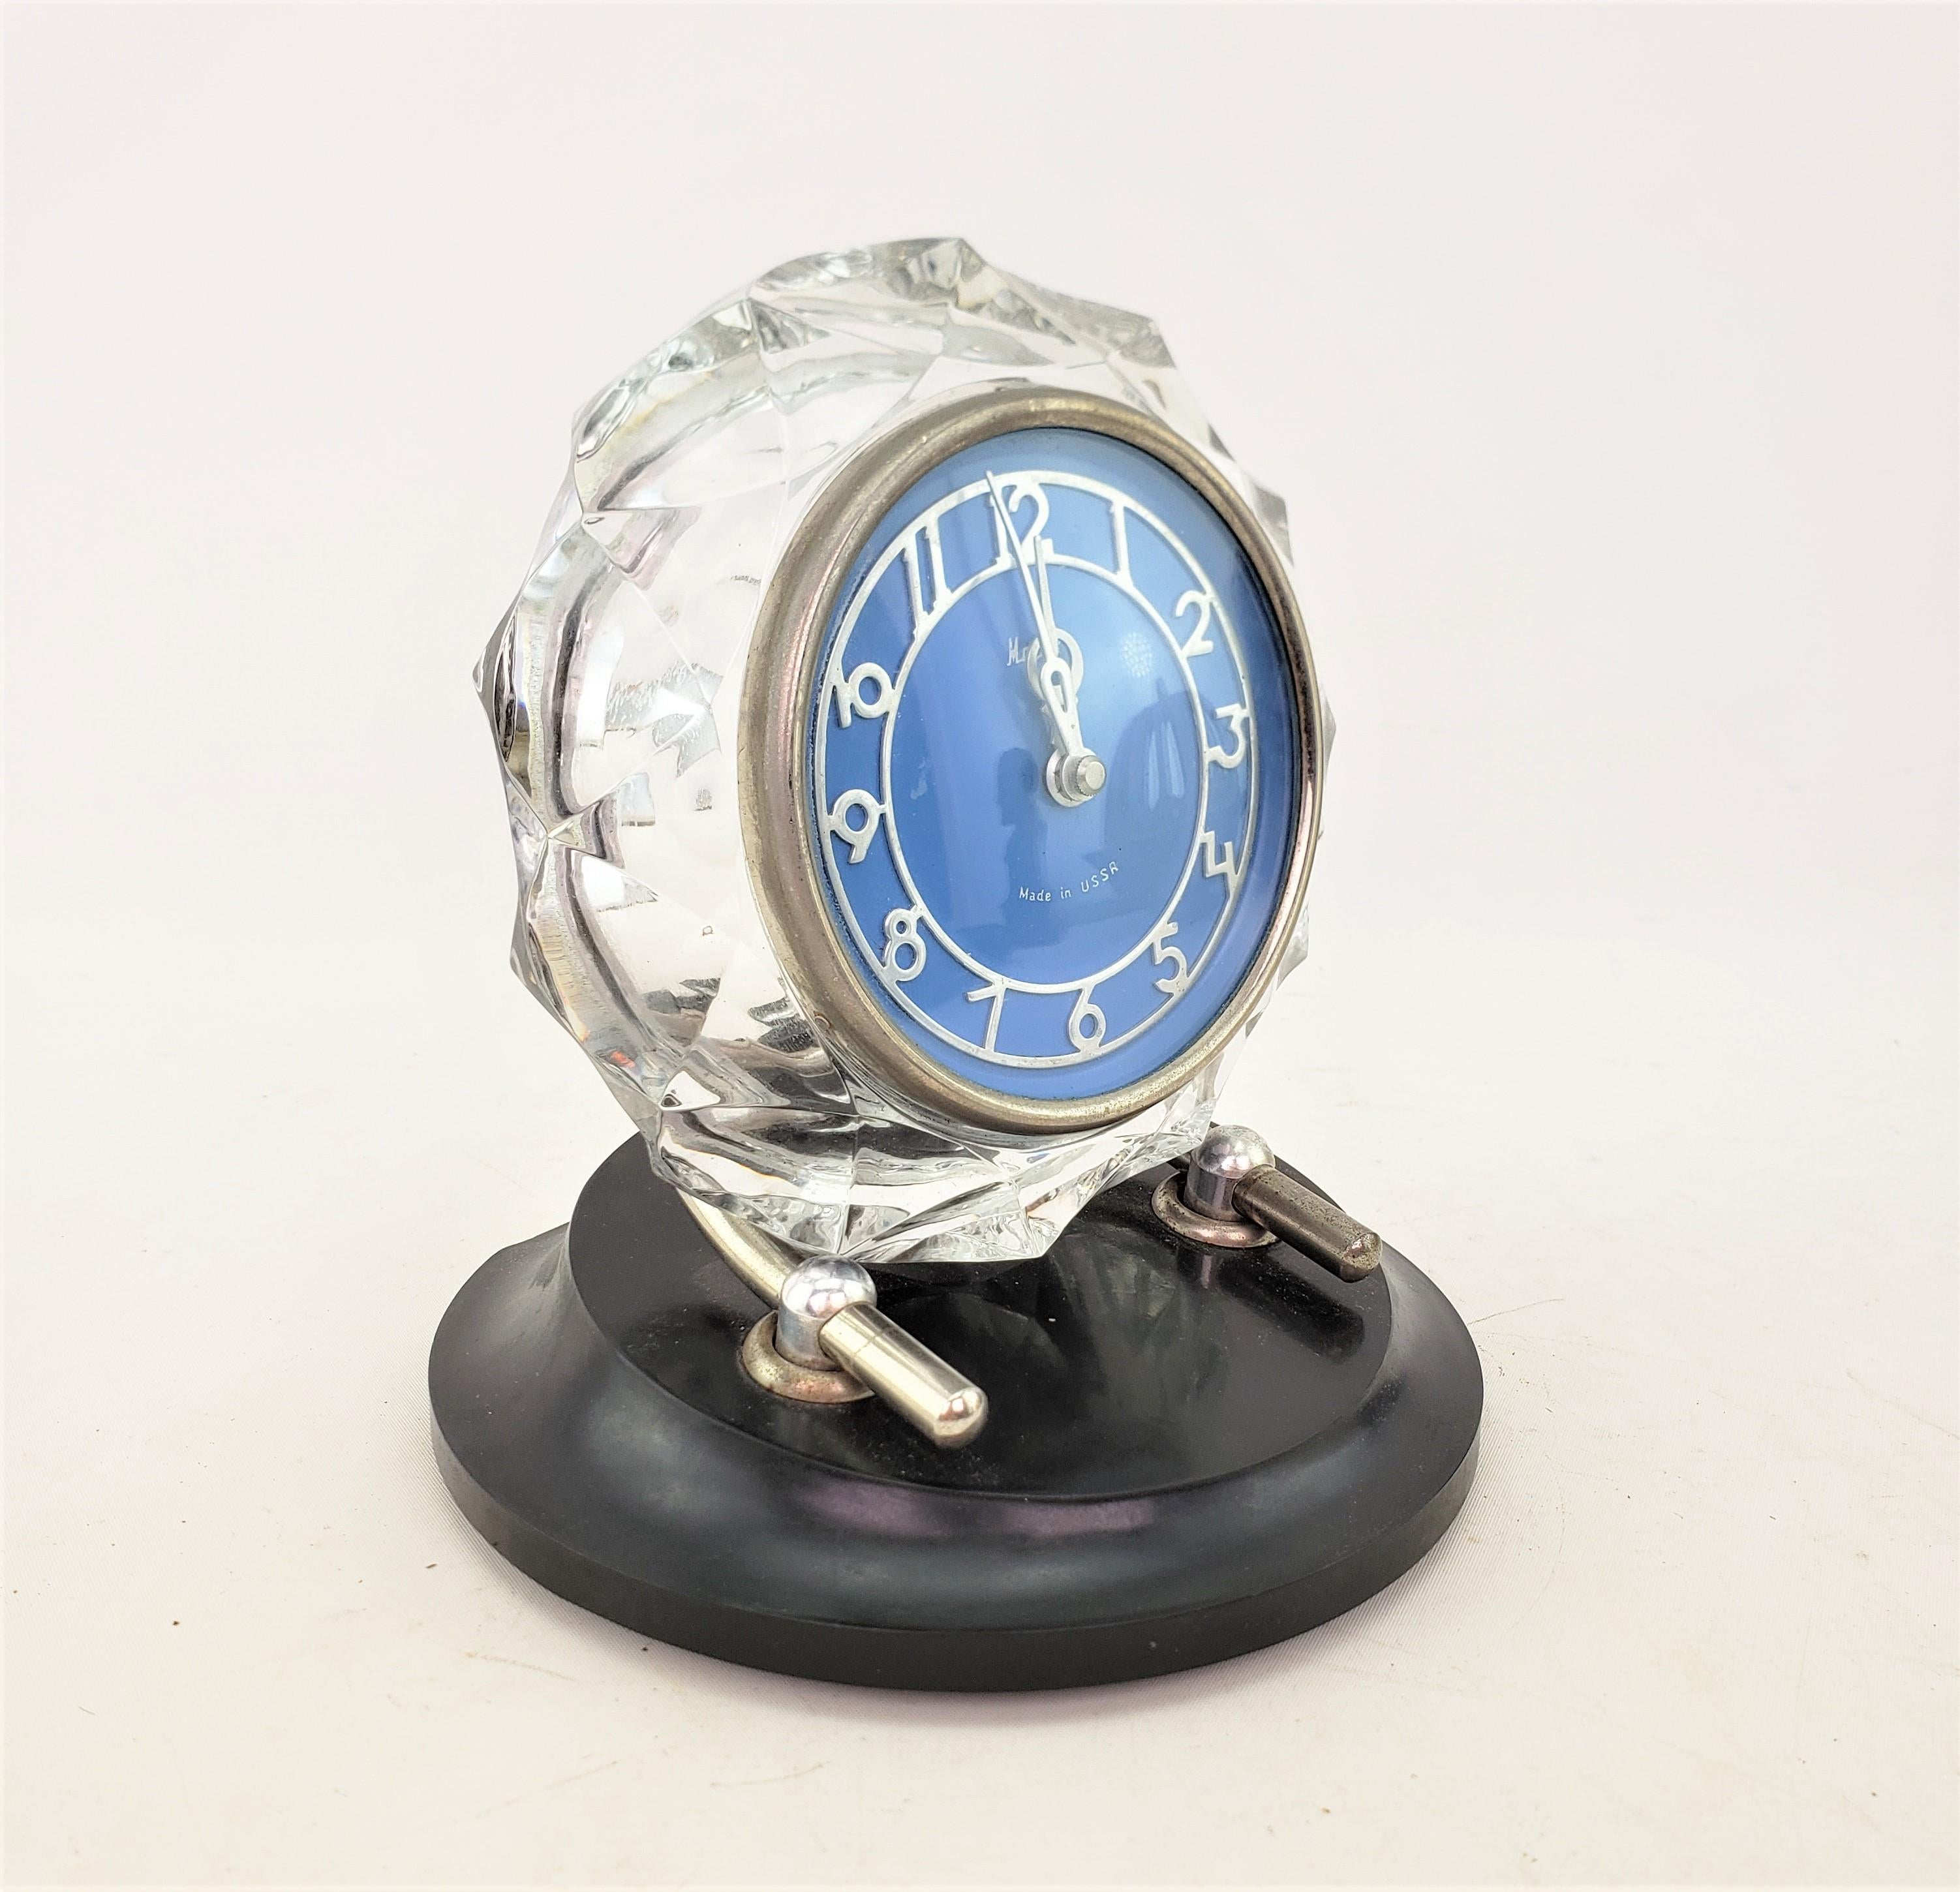 This desk or table clock was made by Majak Mayak of the former U.S.S.R. in approximately 1920 and done in the period Art Deco style. The clock face and movement is composed of metal with a thick and heavy faceted crystal case with steel supports on